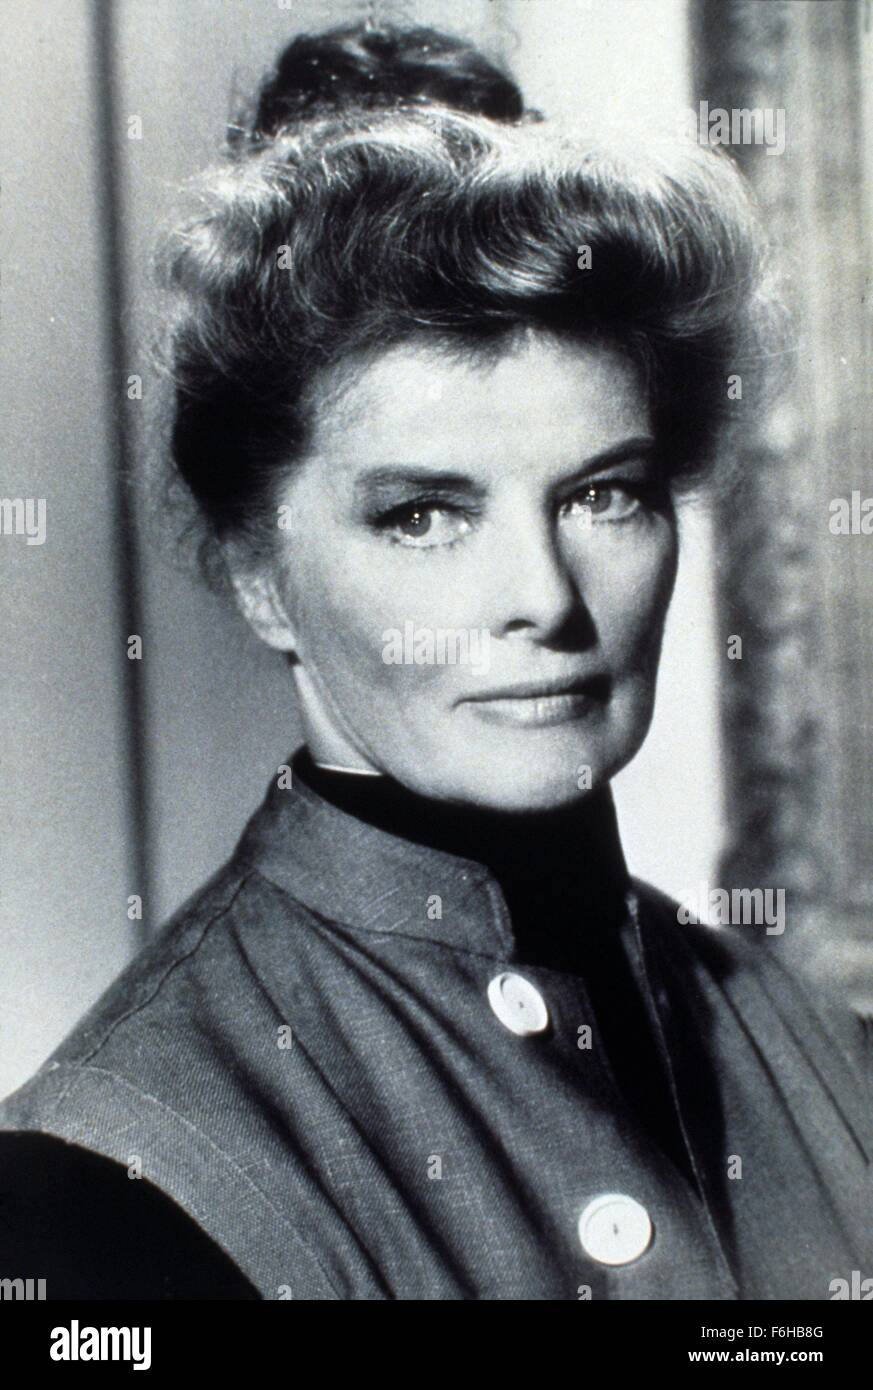 1967, Film Title: GUESS WHO'S COMING TO DINNER, Director: STANLEY KRAMER, Studio: COLUMBIA, Pictured: 1967, KATHARINE HEPBURN, HEAD SHOT. (Credit Image: SNAP) Stock Photo